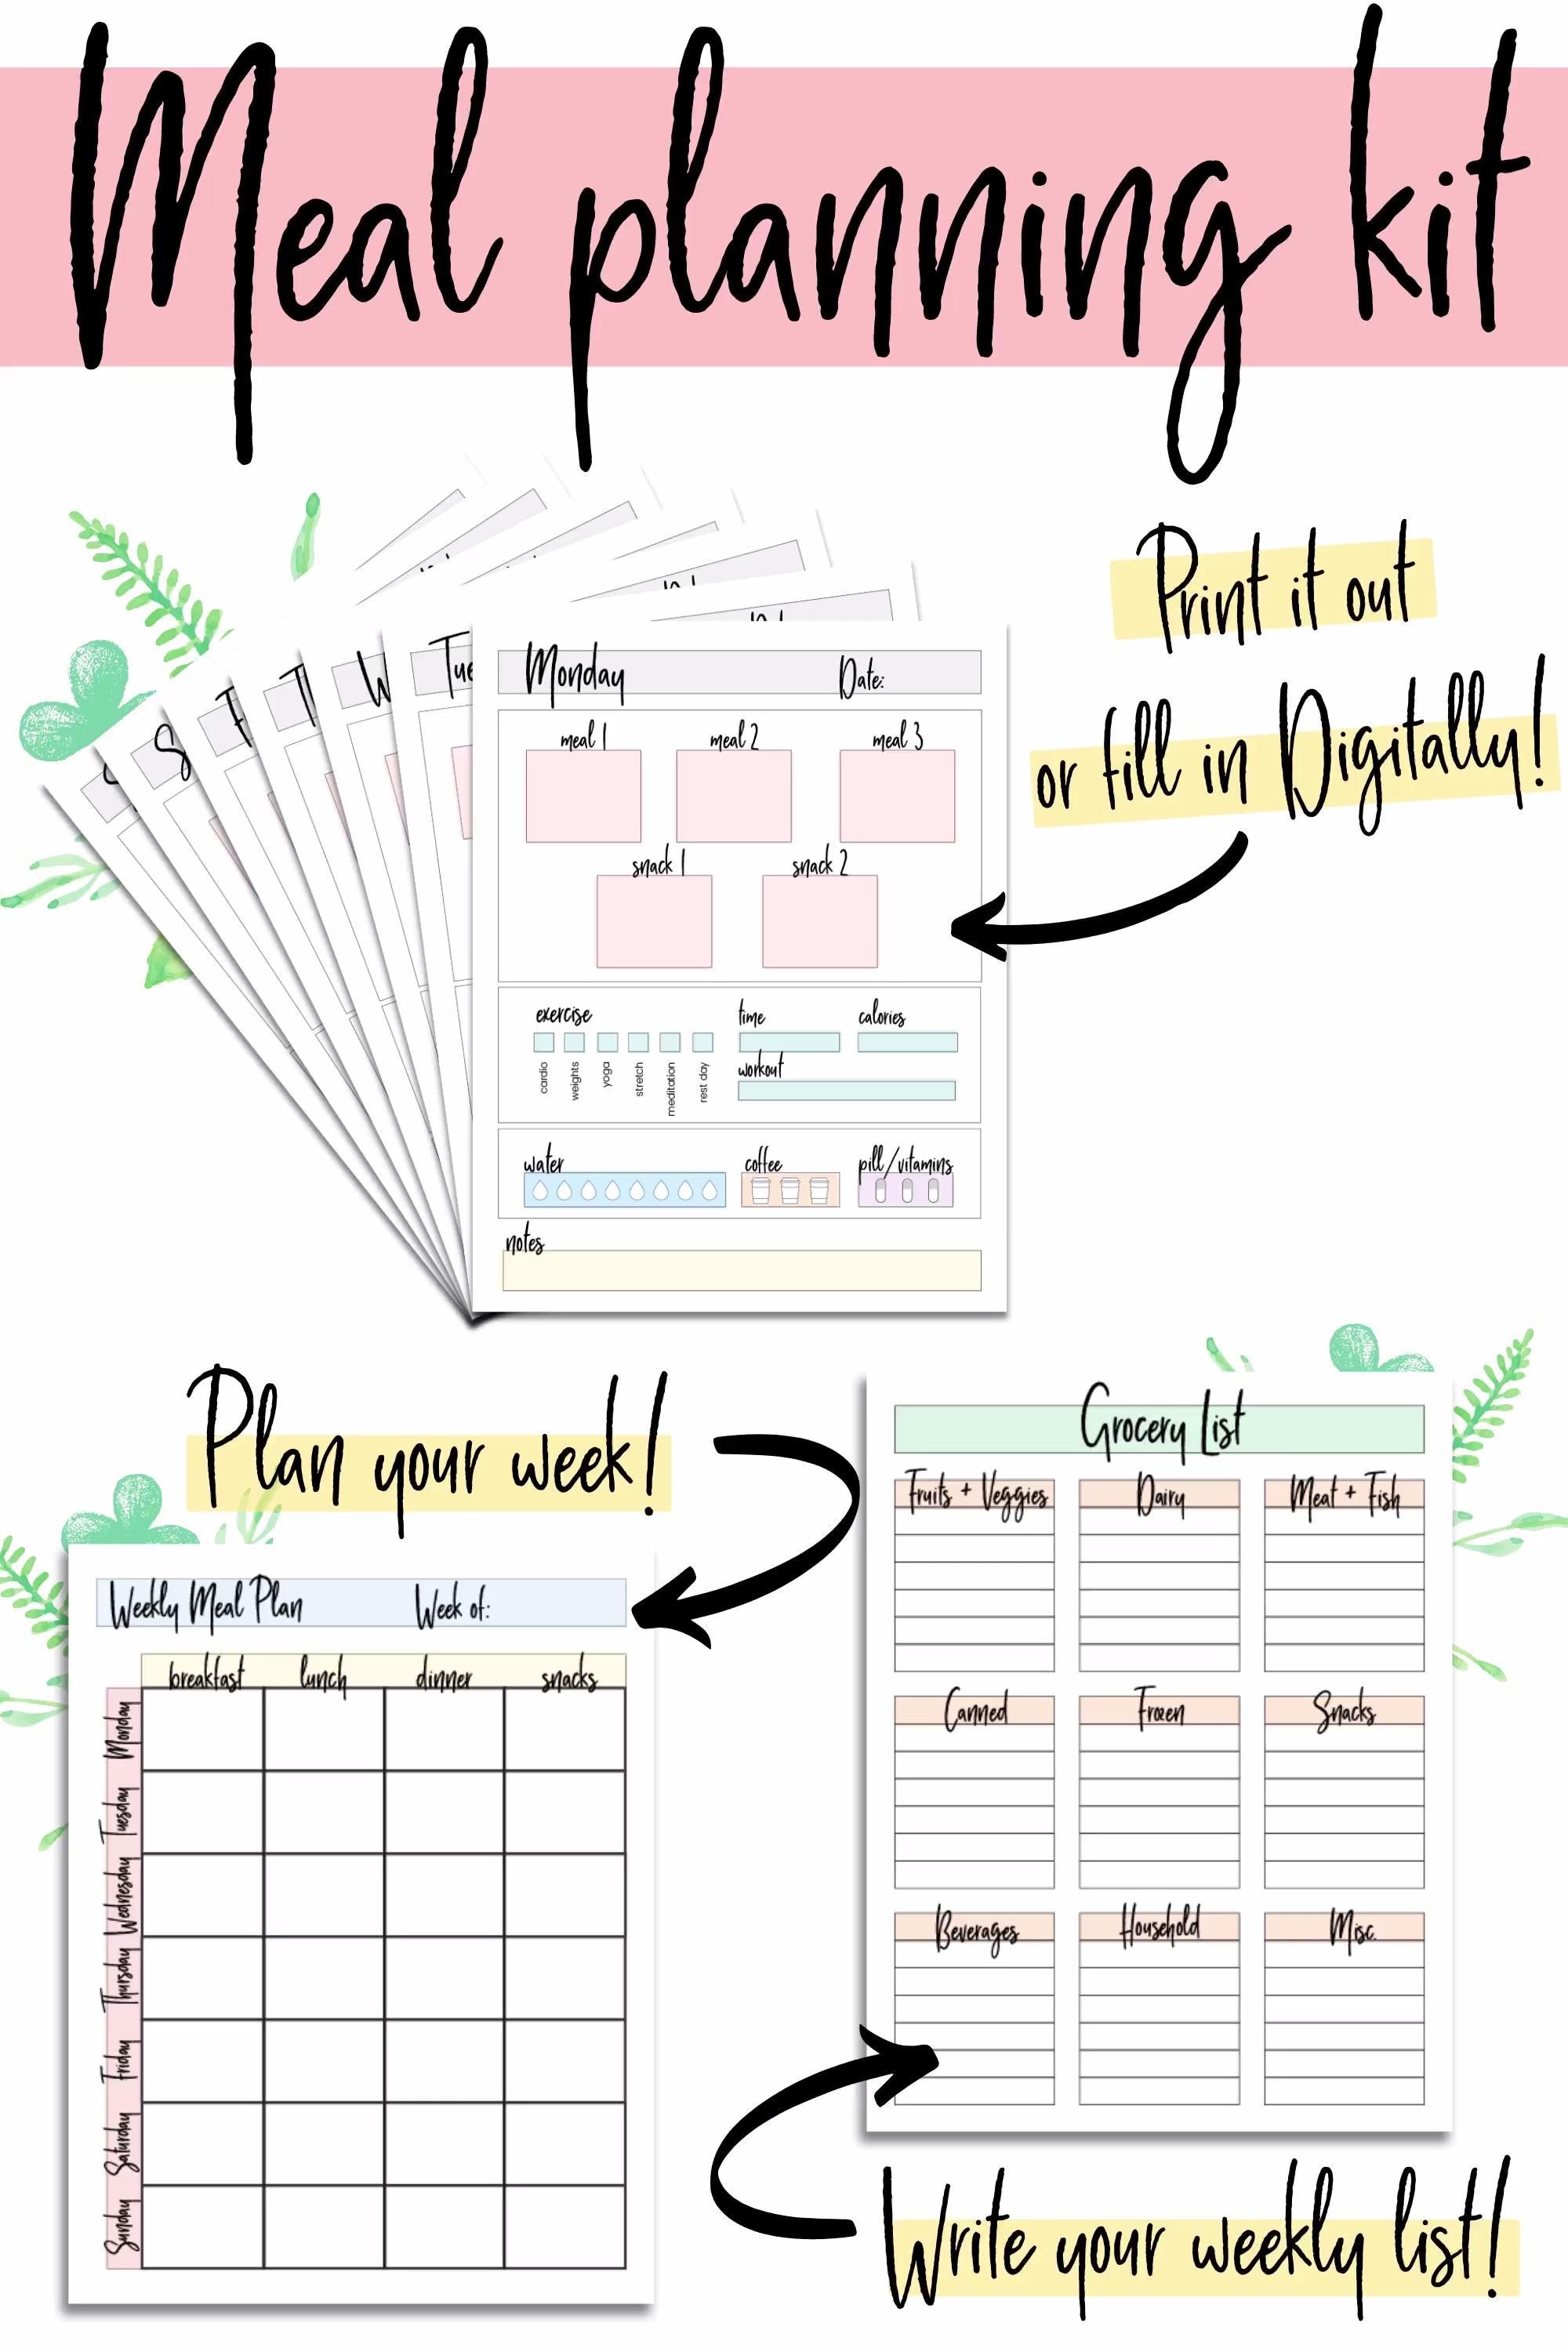 Weekly Meal Planner Printable ~ Daily Meal Planner PDF ~ Health Planner ~ Fitness Planner Template -   fitness Planner pages